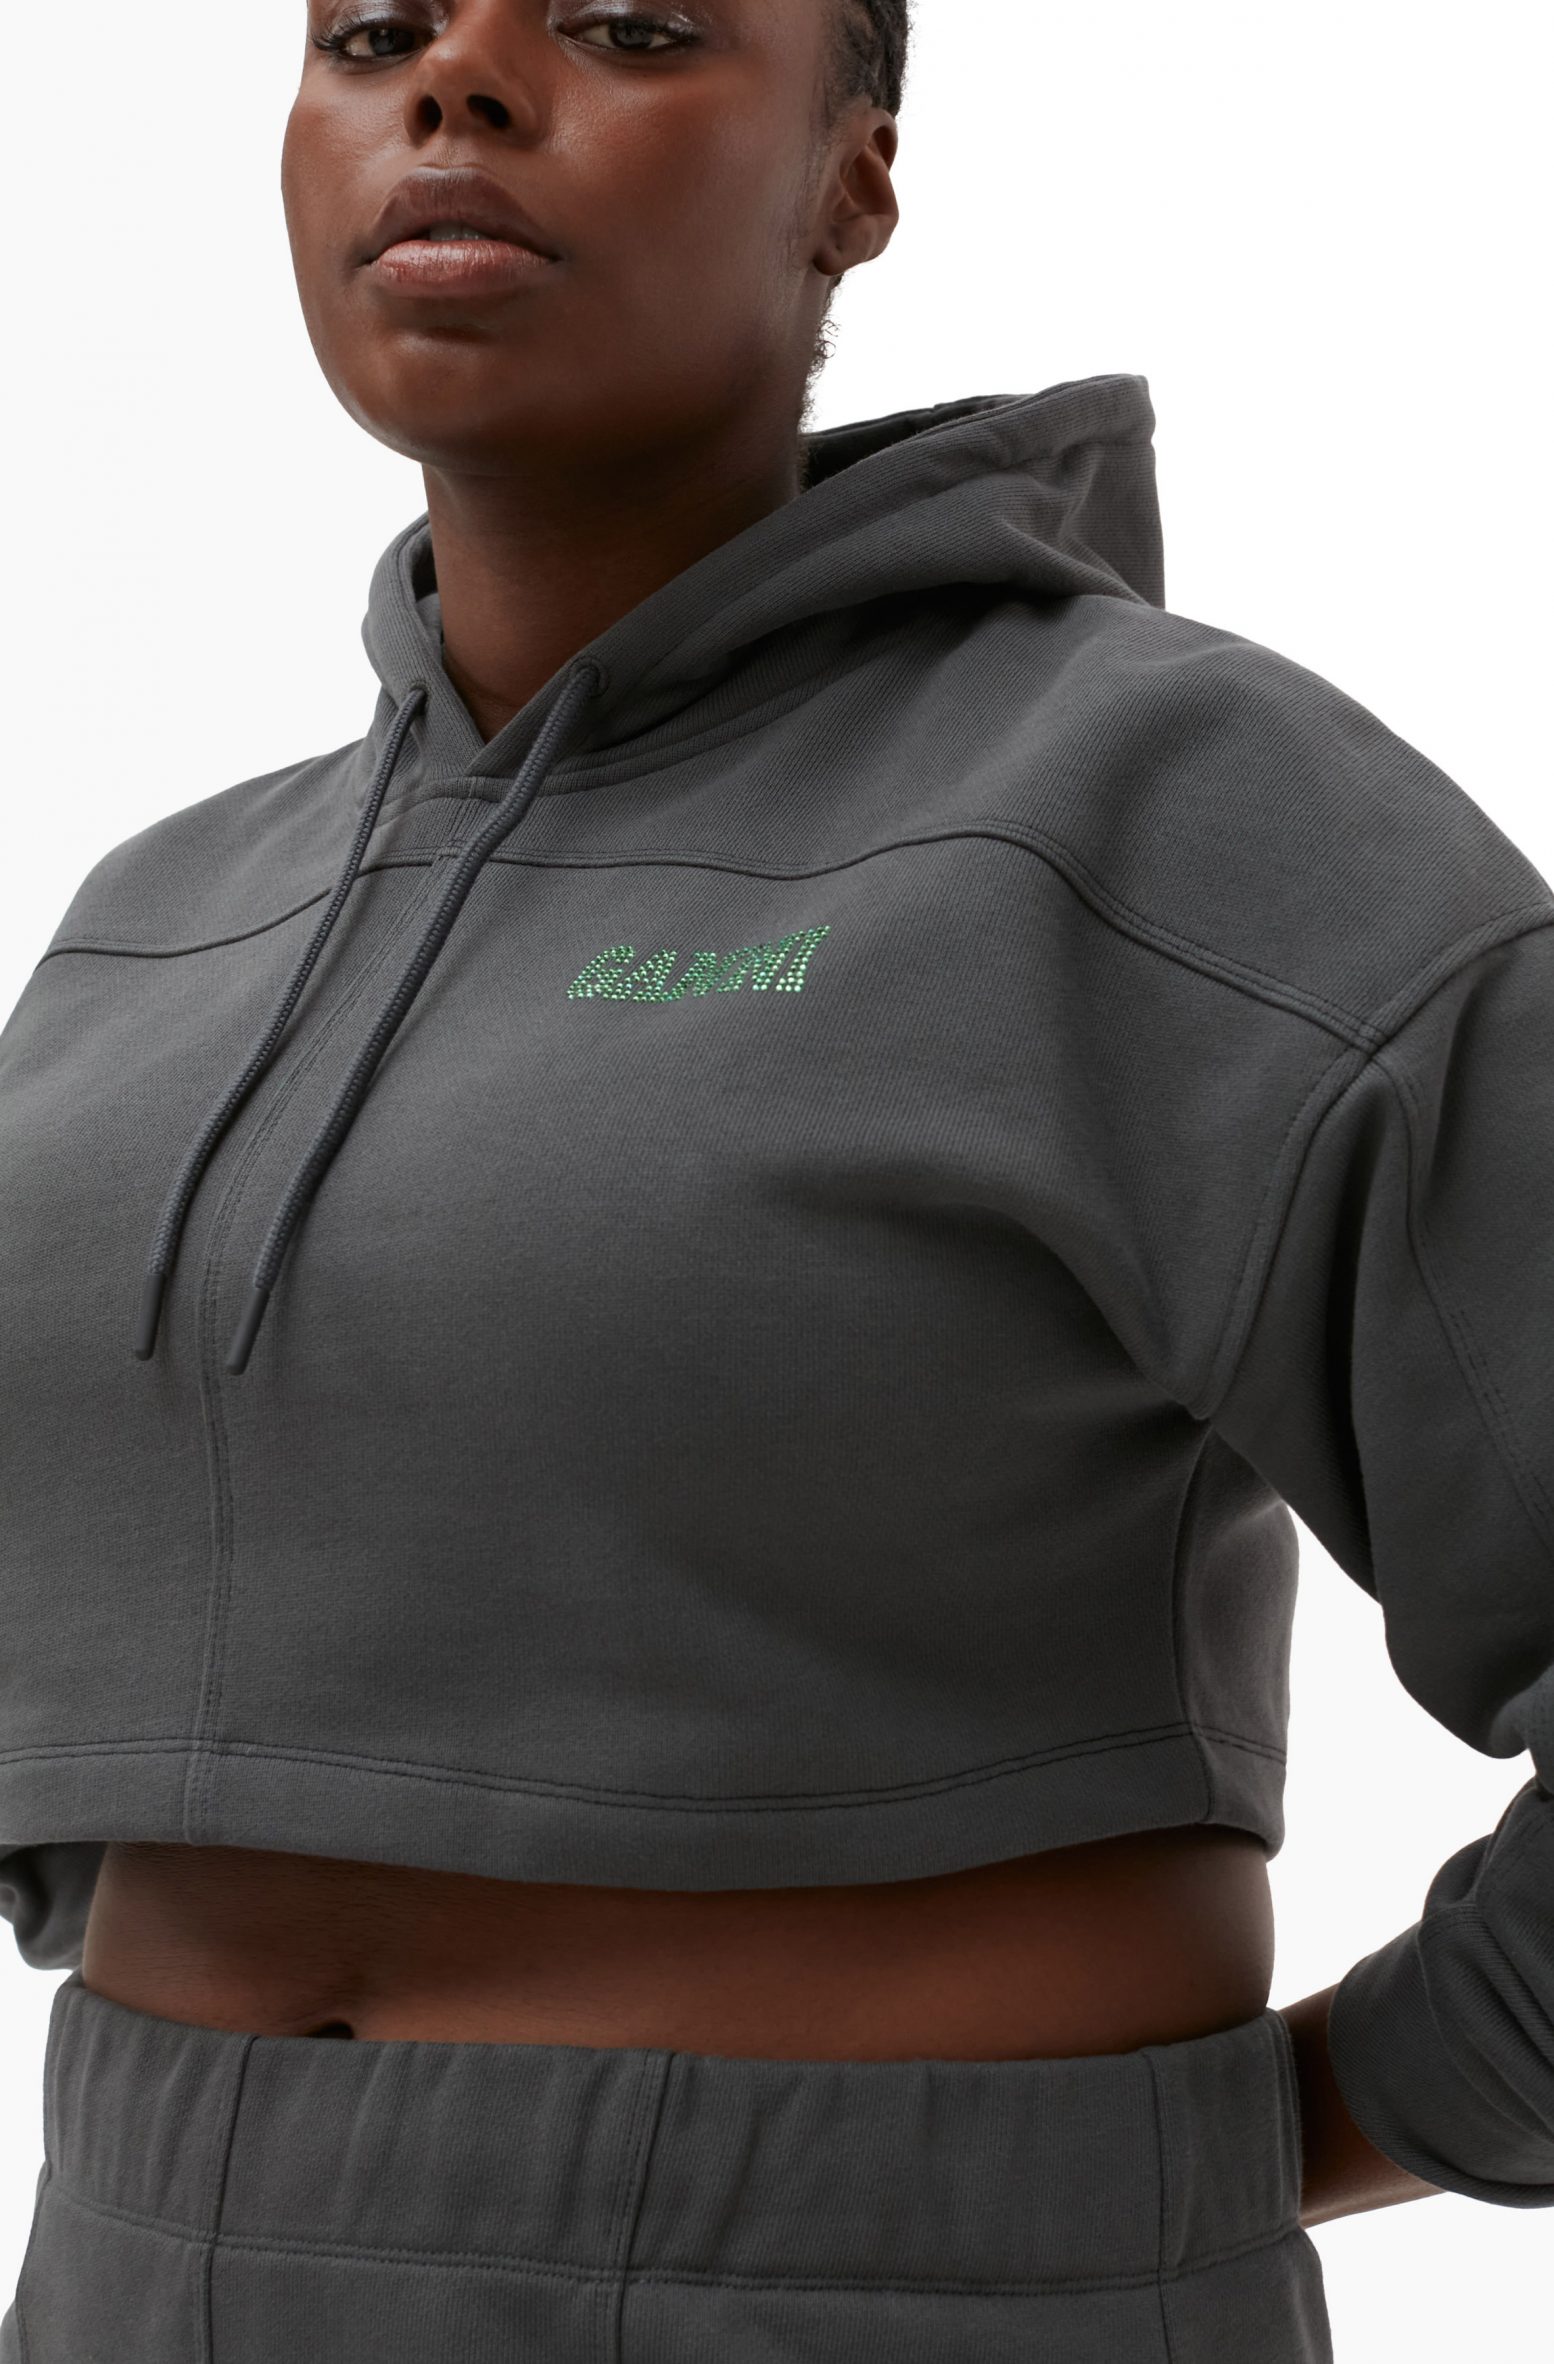 Ganni and Pyratex create tracksuit collection made from banana waste